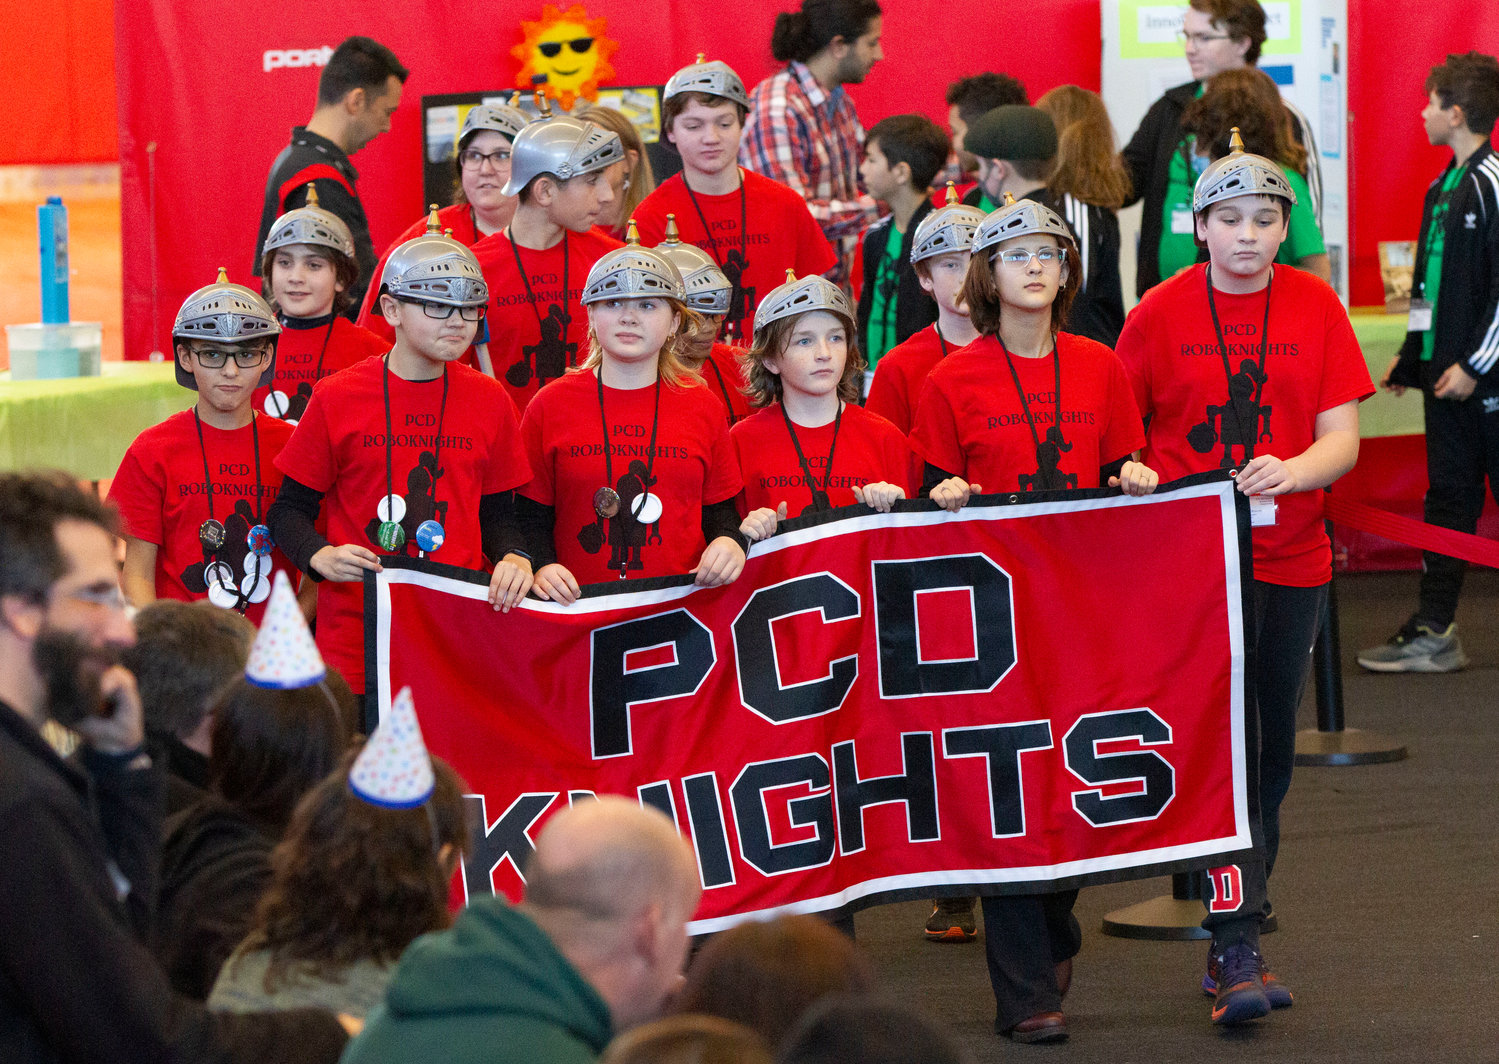 The “Roboknights” from the Providence Country Day School enter the gym during the opening ceremonies.